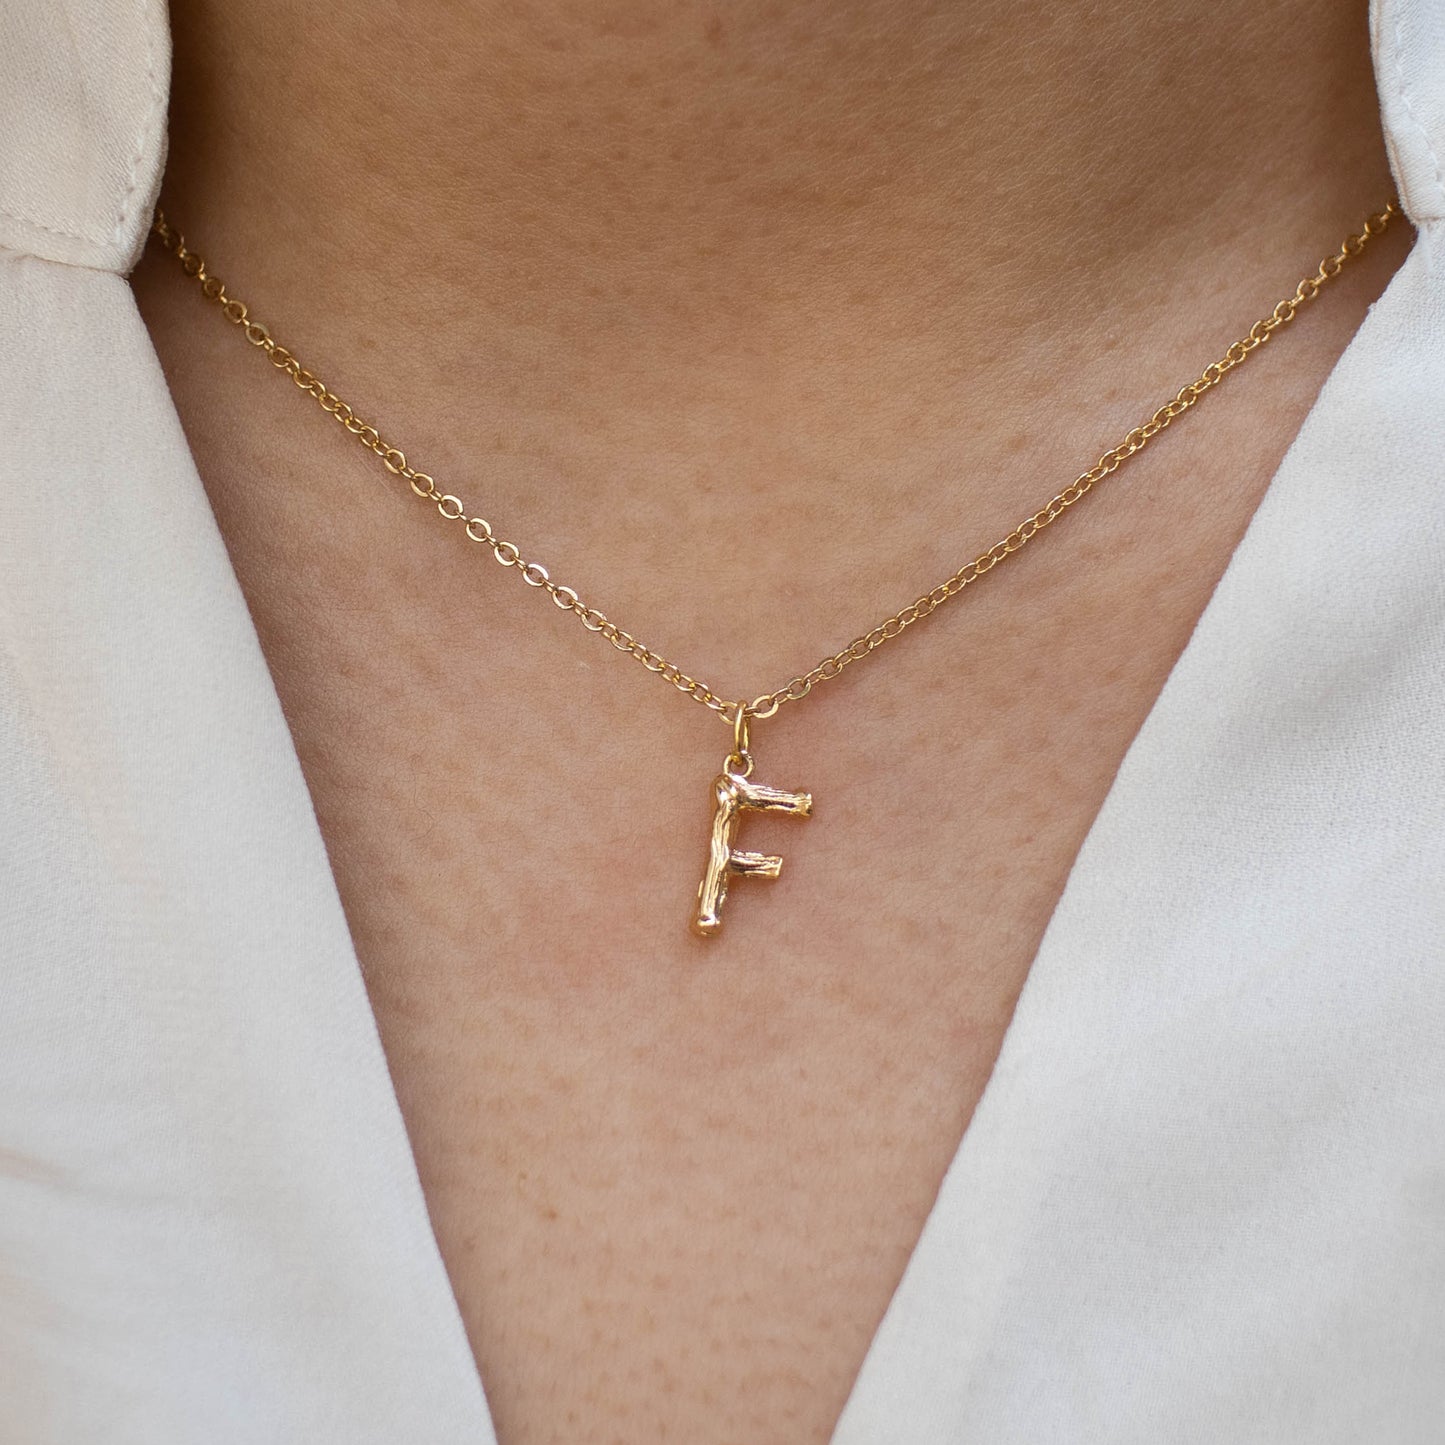 This photo features a thin chain necklace made of 14K gold-plated sterling silver, paired with a golden Letter pendant.